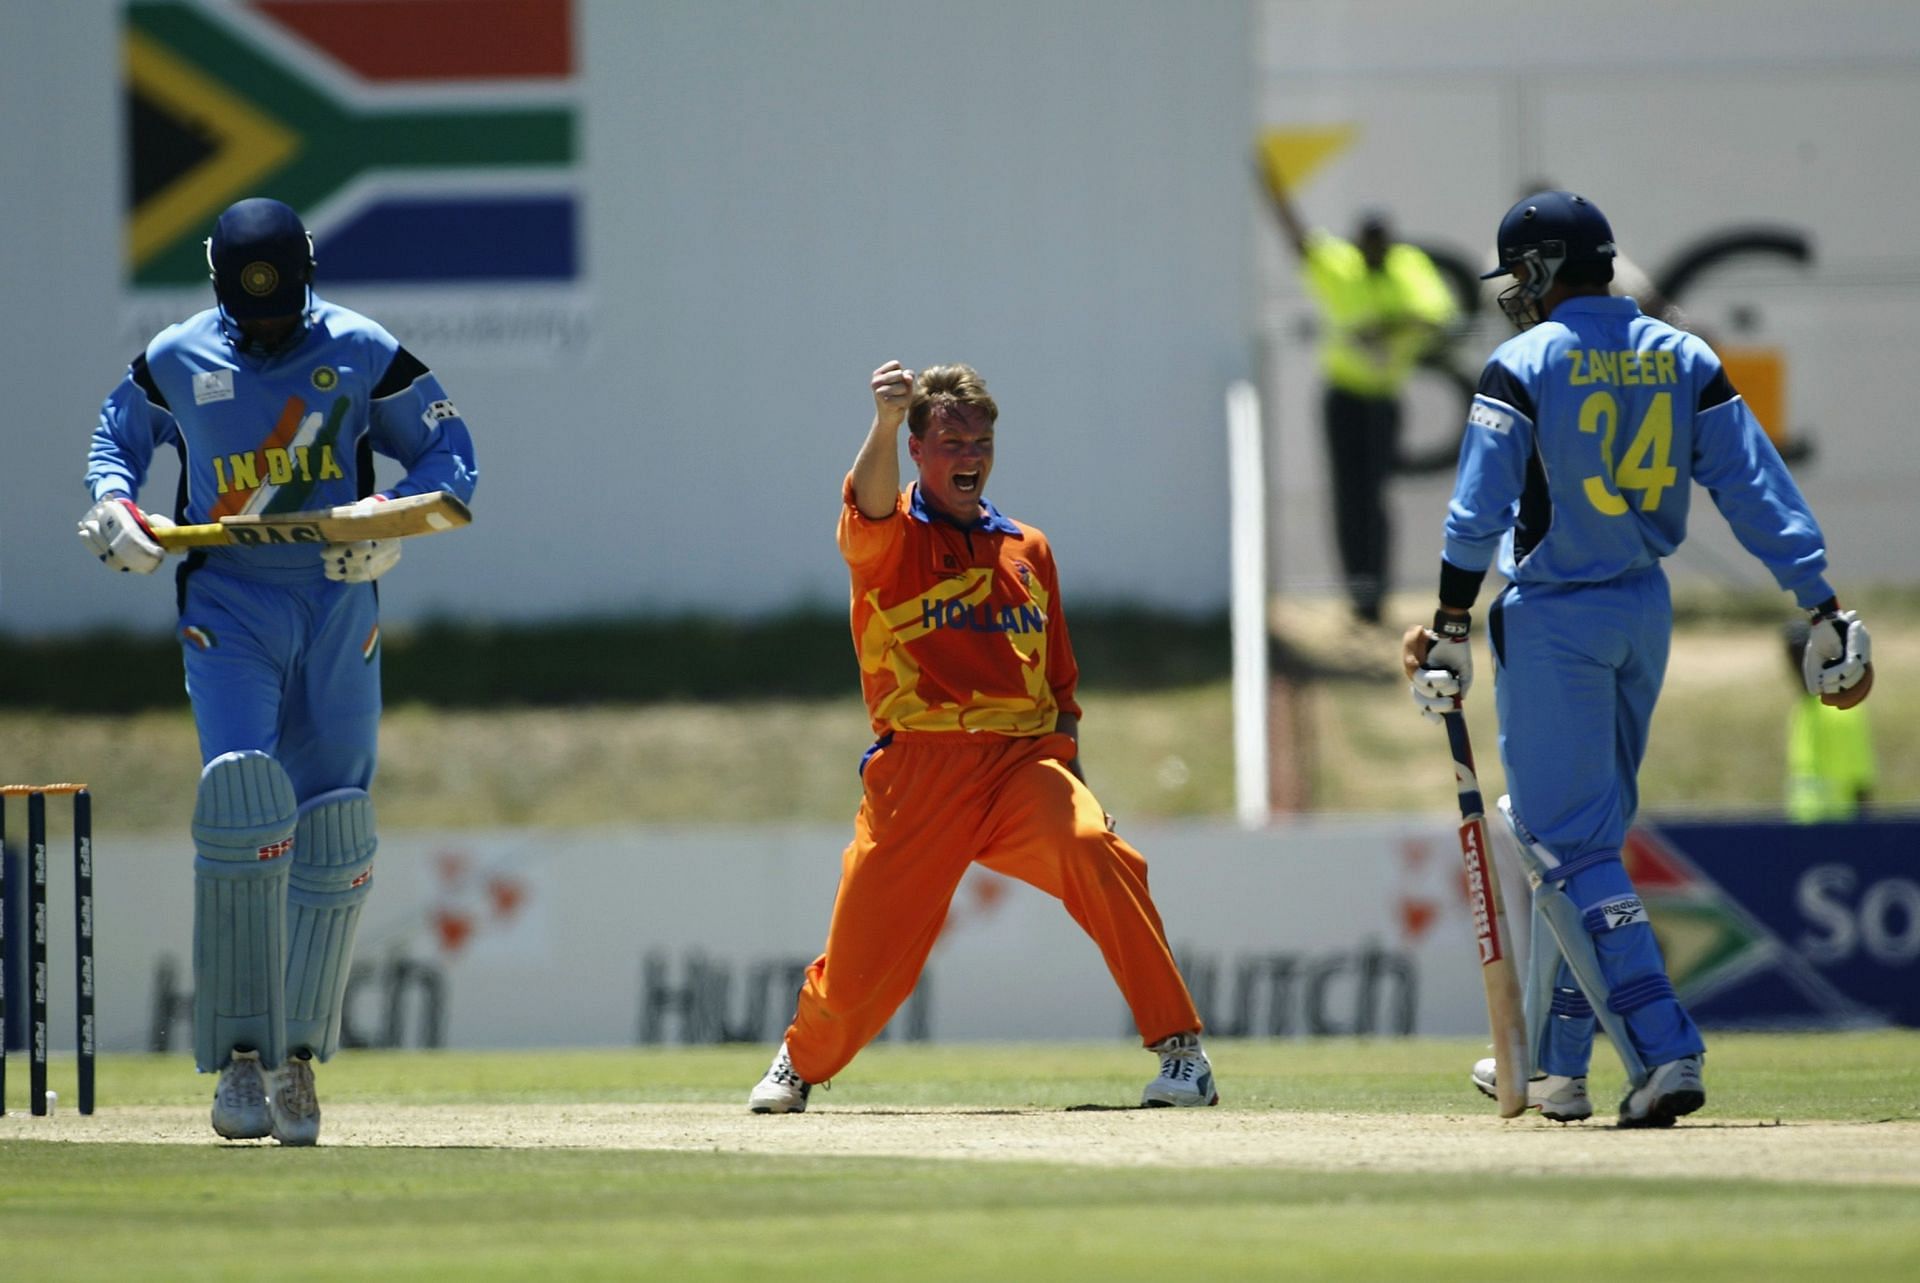 Tim de Leede of Holland celebrates after bowling out Zaheer Khan of India